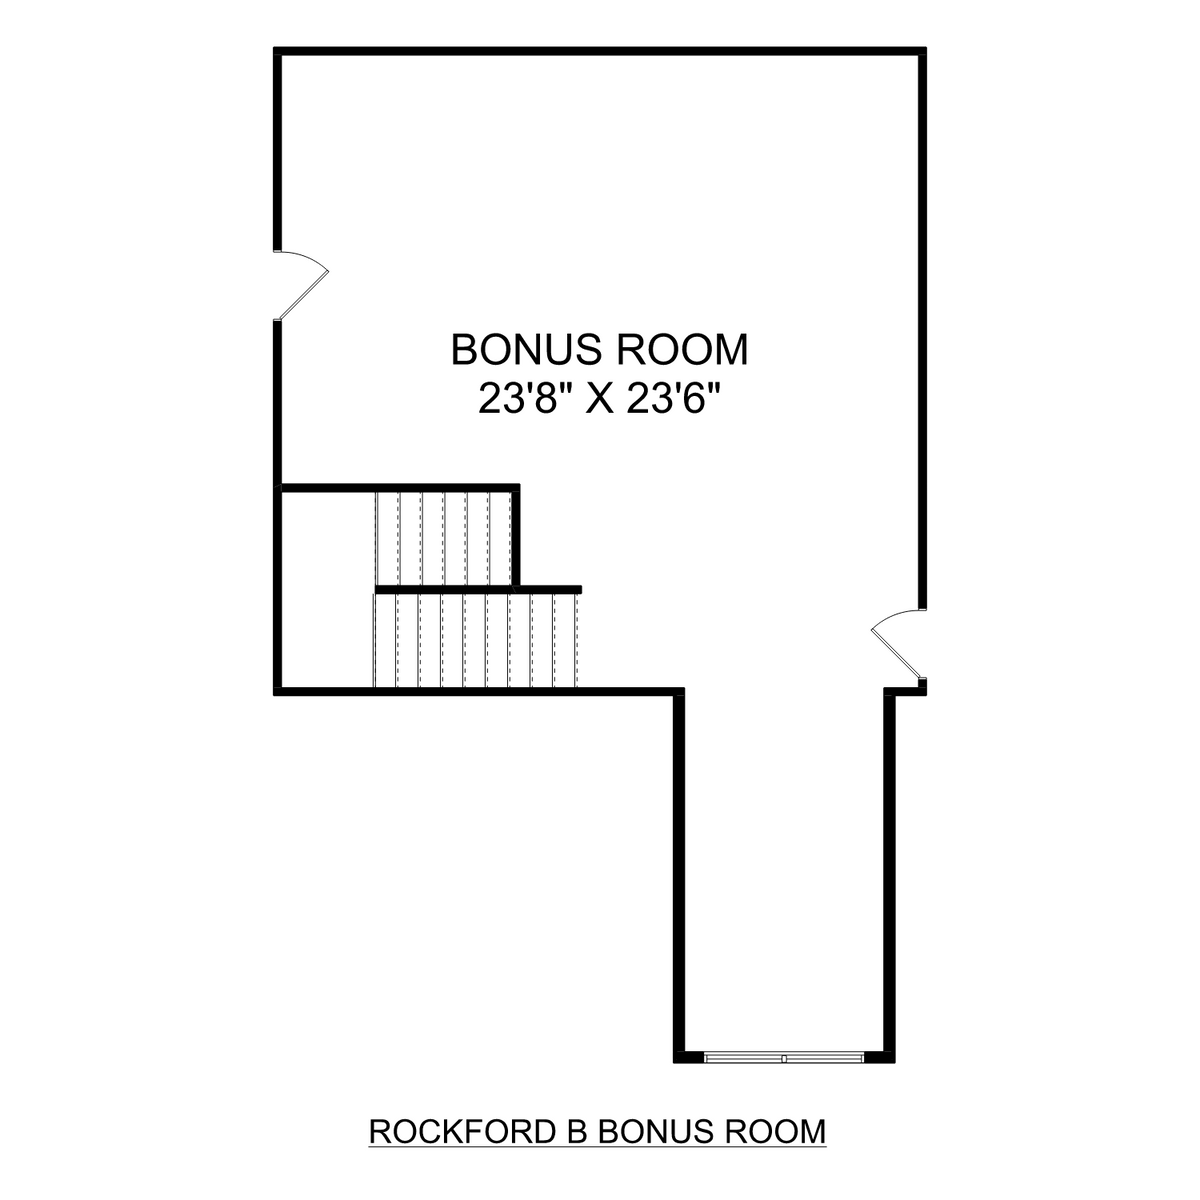 2 - The Rockford B with Bonus floor plan layout for 107 Nellies Way in Davidson Homes' Pikes Ridge community.